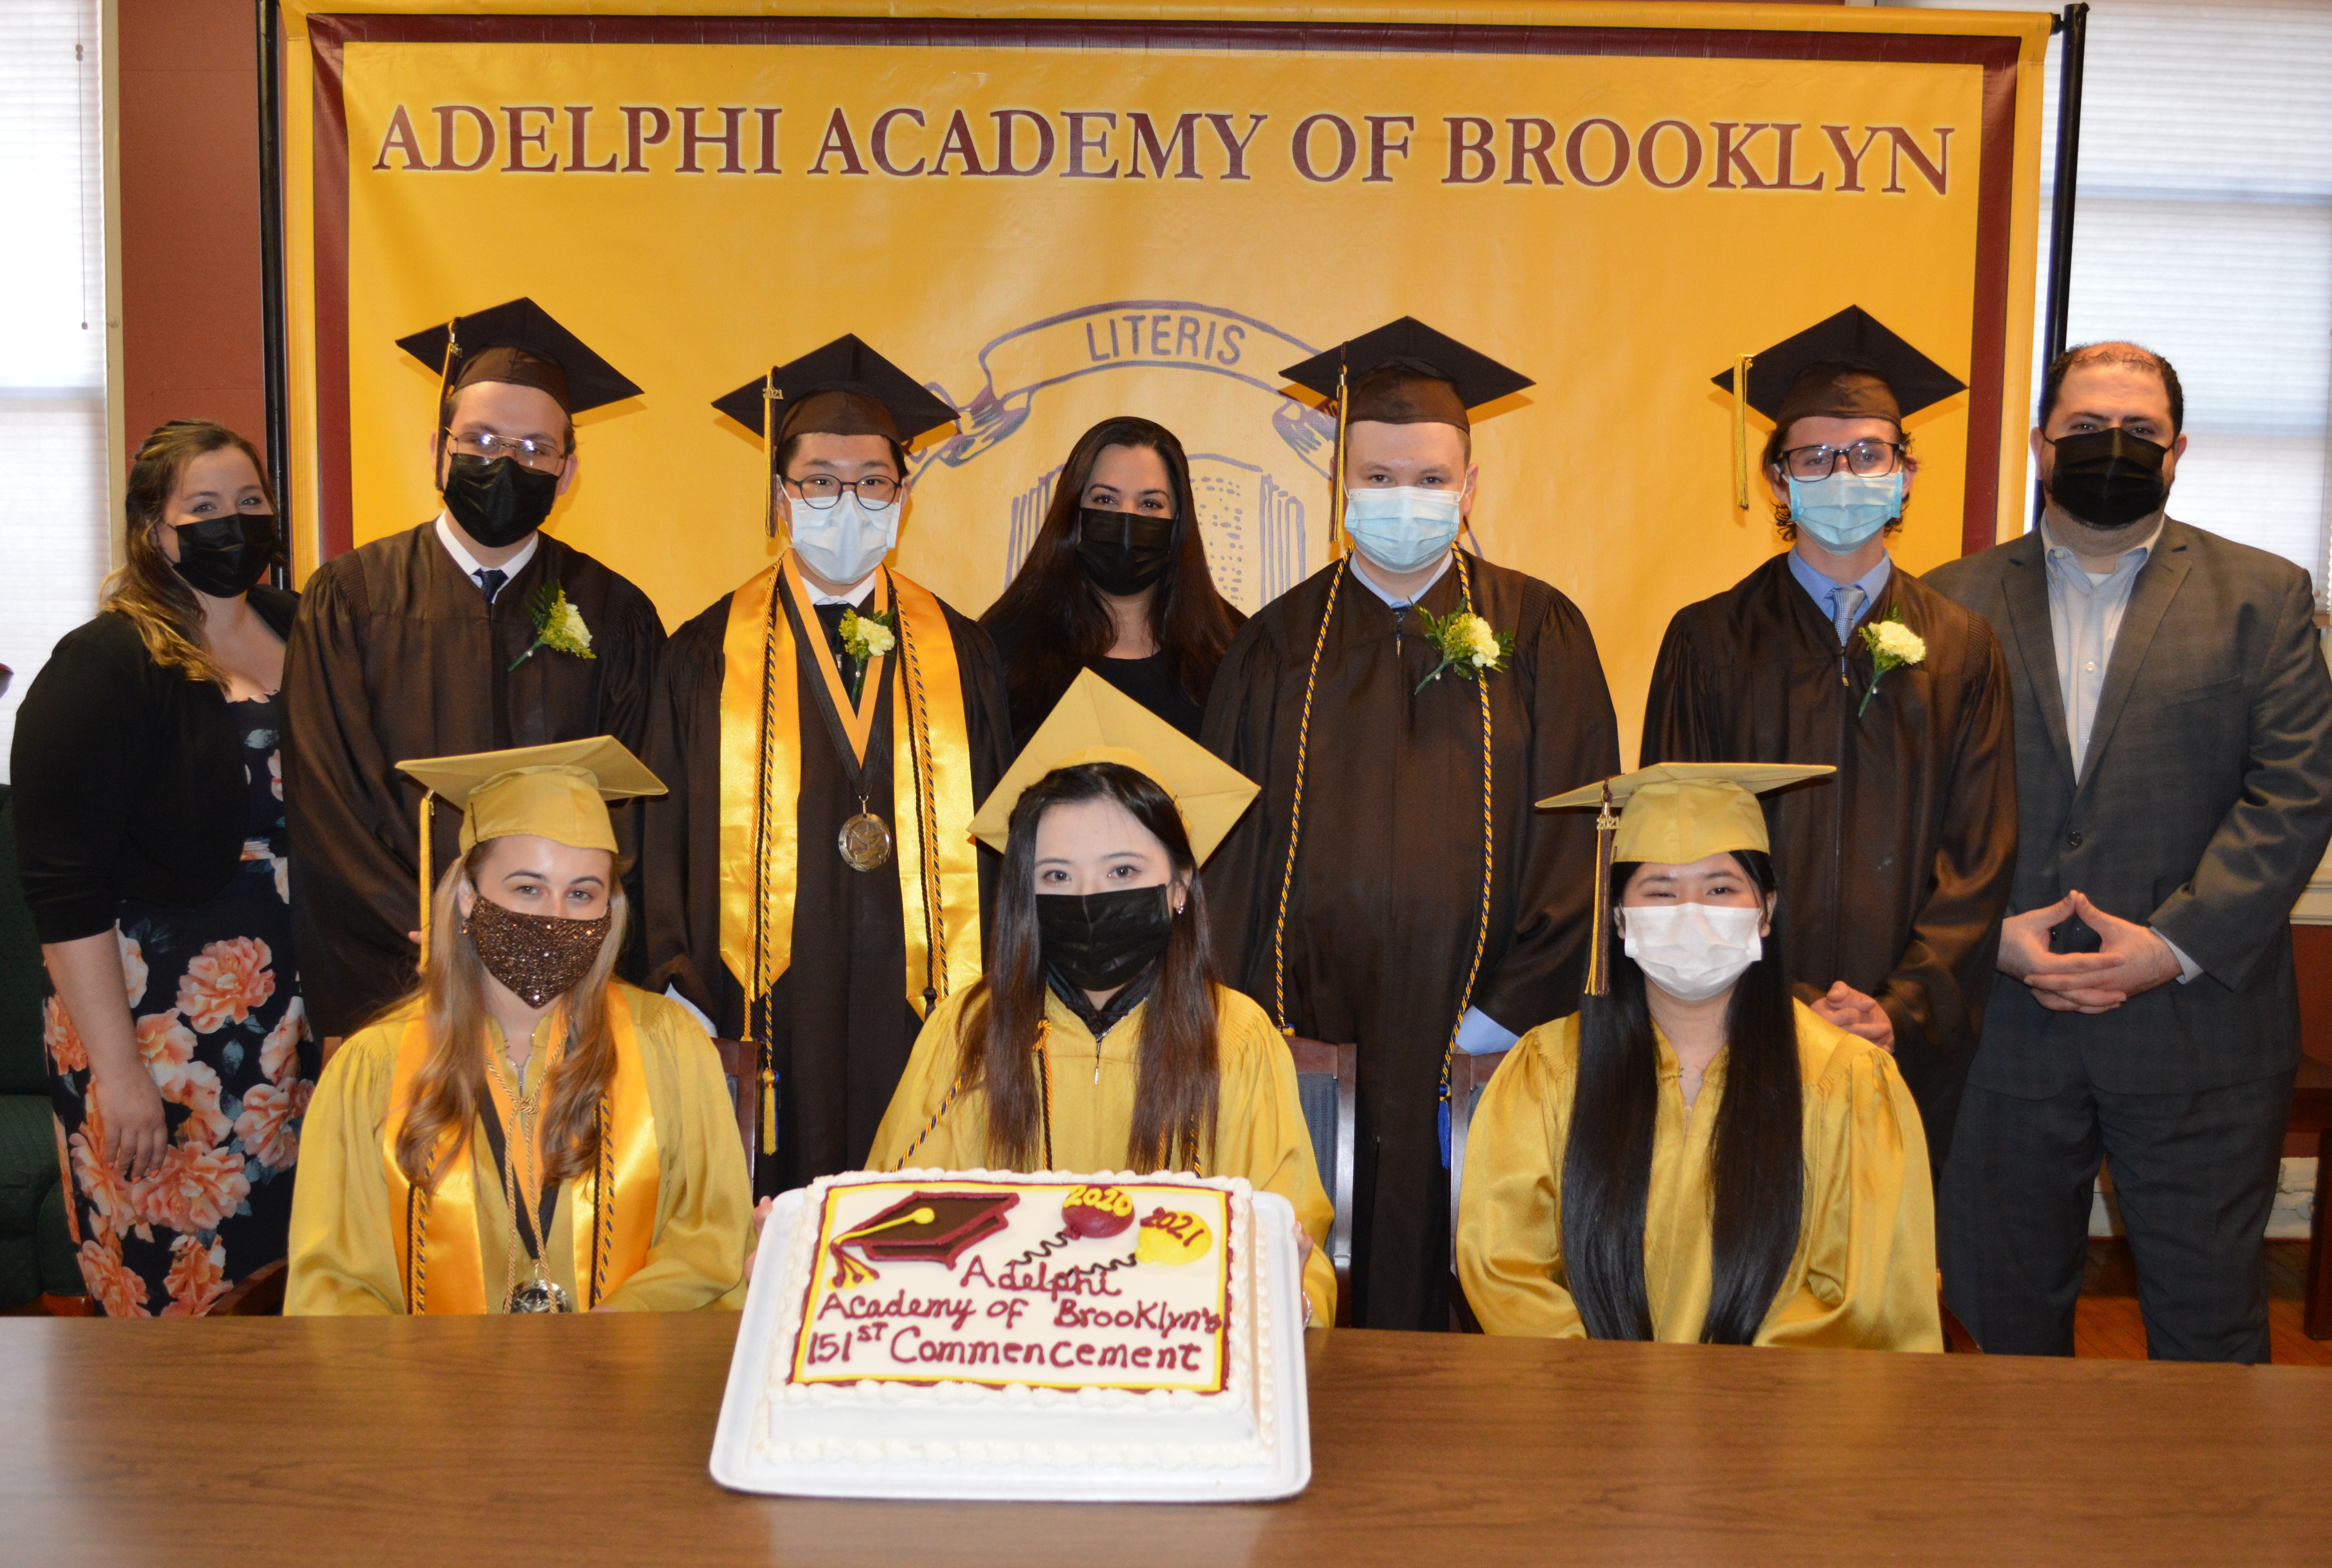 Head of School Ms. Iphigenia Romanos (center), Academy Guidance Counselor Ms. Megan Wynne (left) and Director of Academy Operations Mr. Albert C. Corhan (right) congratulate members of Adelphi’s Class of 2021 after the ceremony!